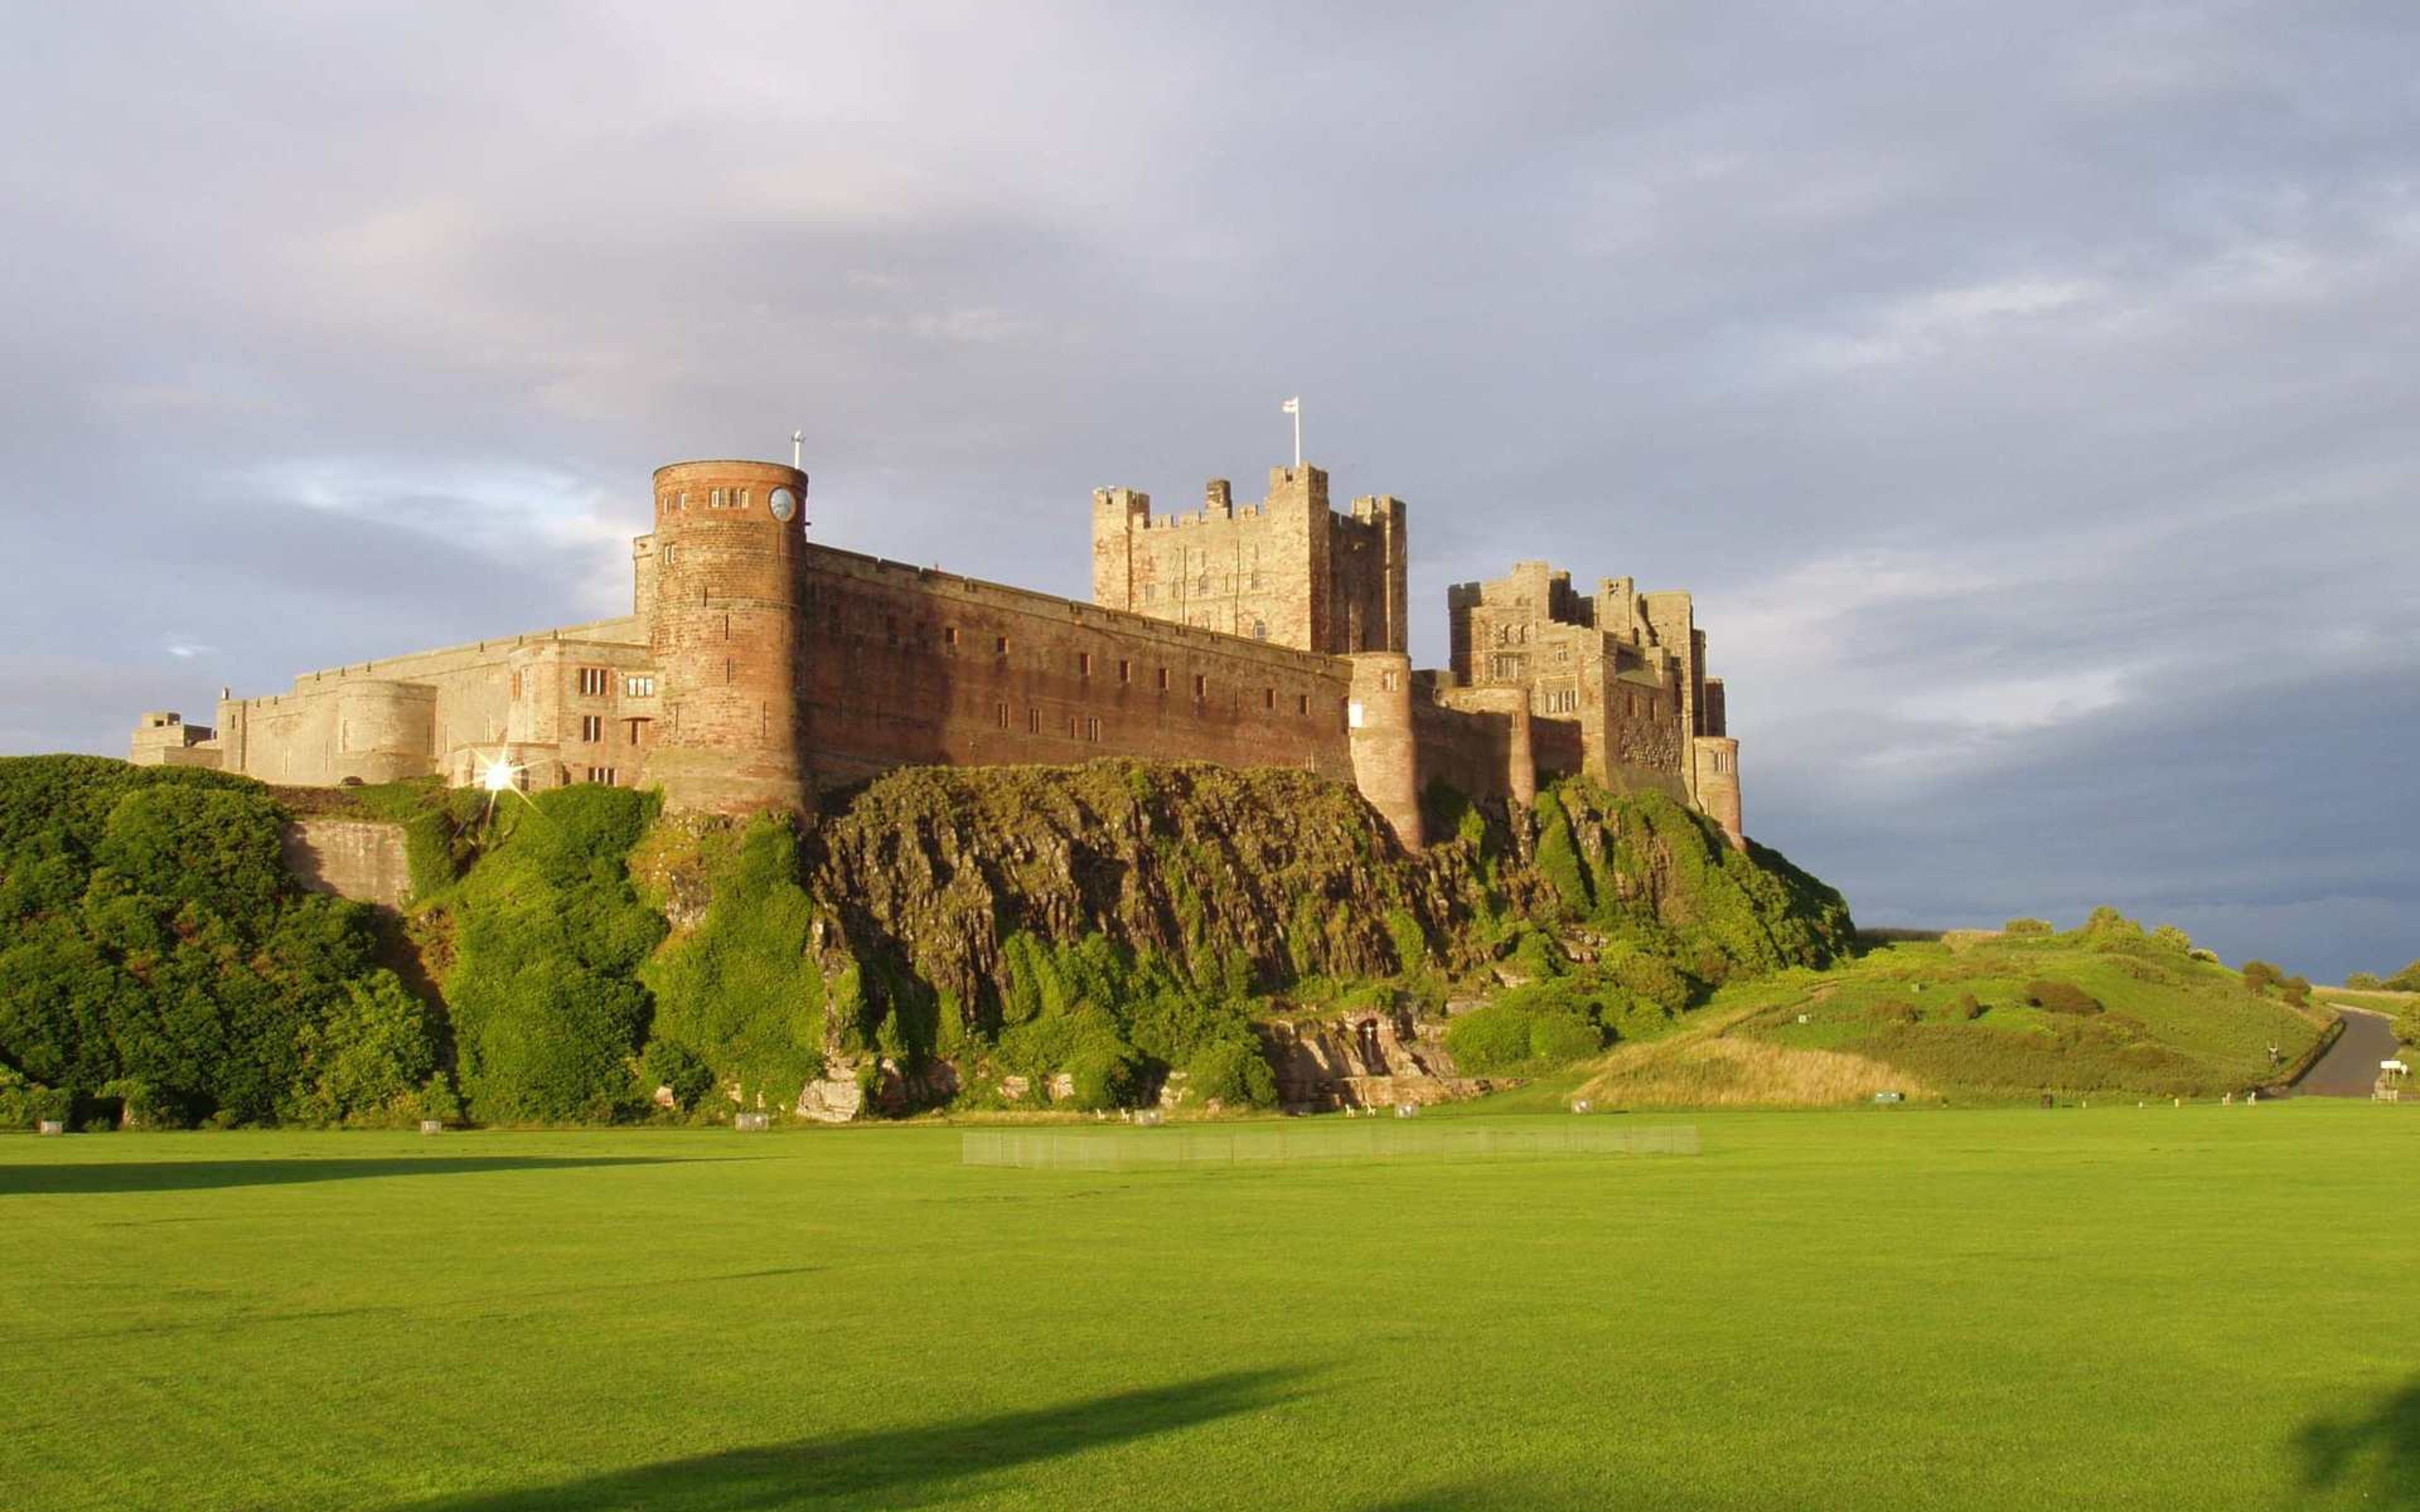 Old castle in England - Bamburgh